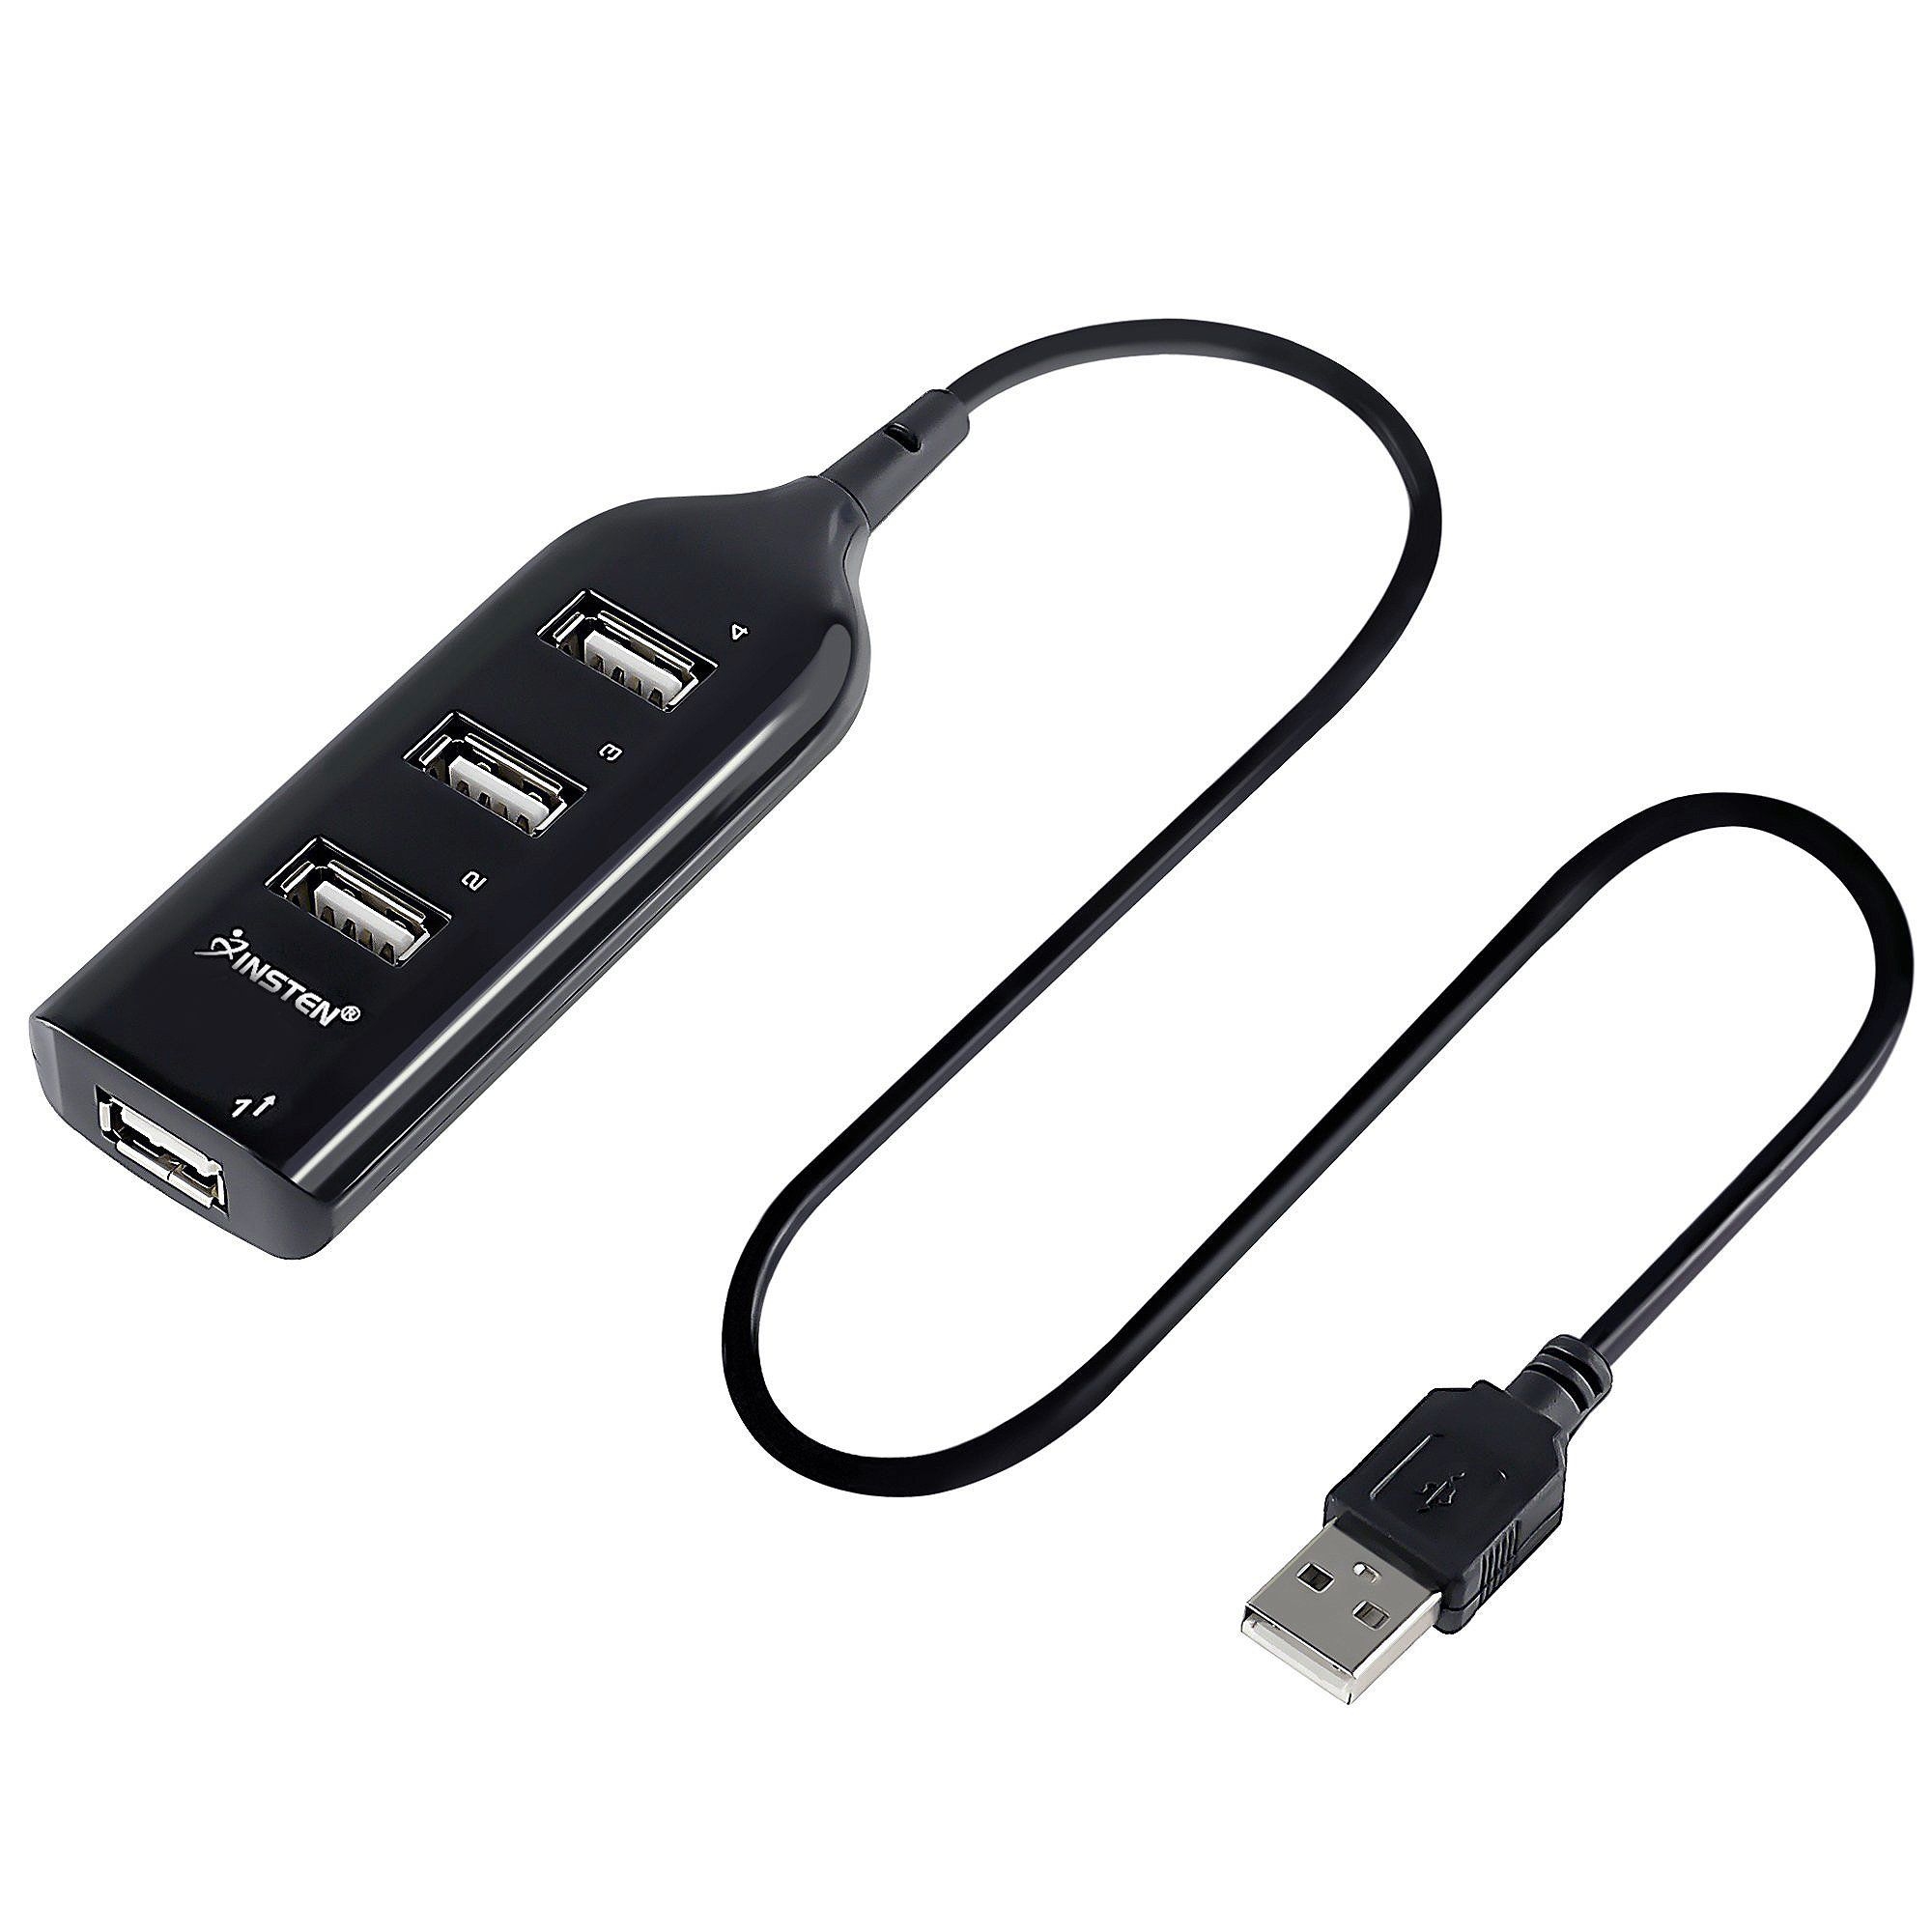 4 Port USB Hub Expander for Laptop PC Computer, External Multi 2.0 Splitter Extender for MacBook Pro 2015 & Air 2017 with Cable Cord, 1 - image 3 of 4